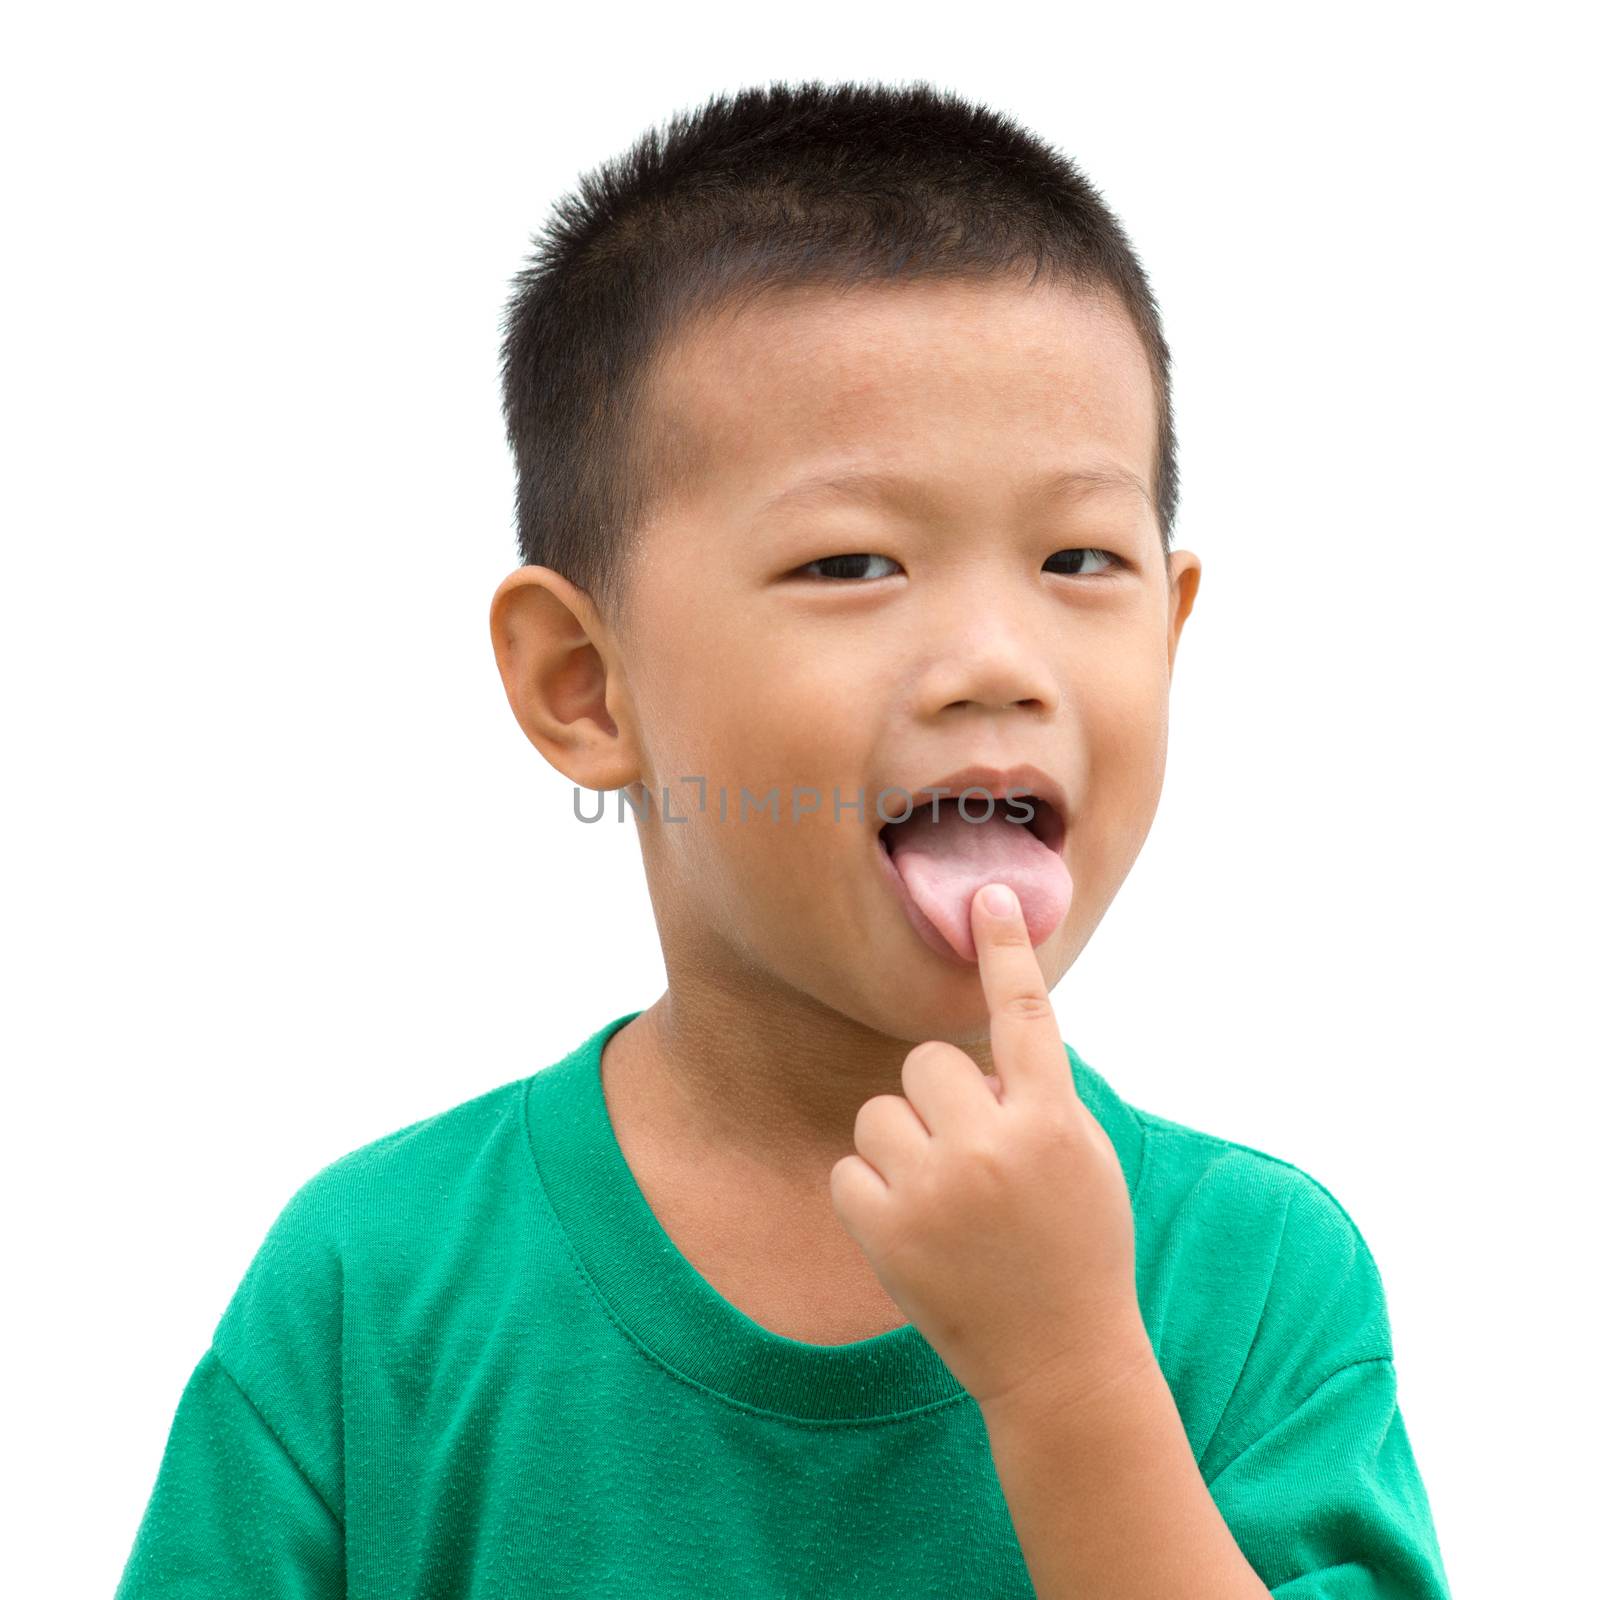 Happy Asian child pointing his tongue and smiling. Portrait of young boy showing body parts isolated on white background.